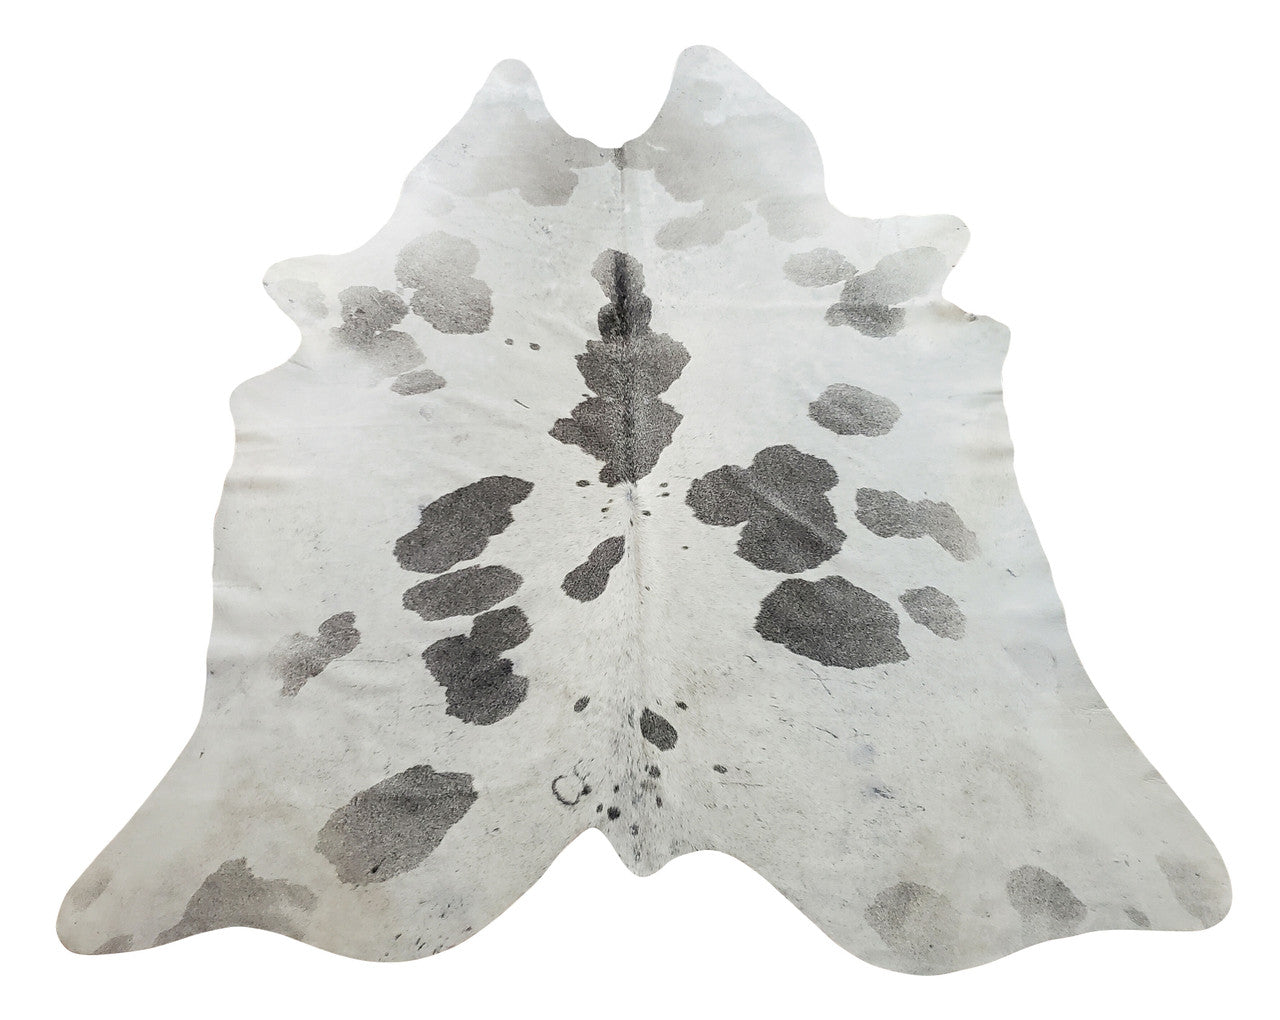 This large cowhide rug is perfect! It will arrive sooner than expected, the quality is top notch, and it’s beautiful! 
